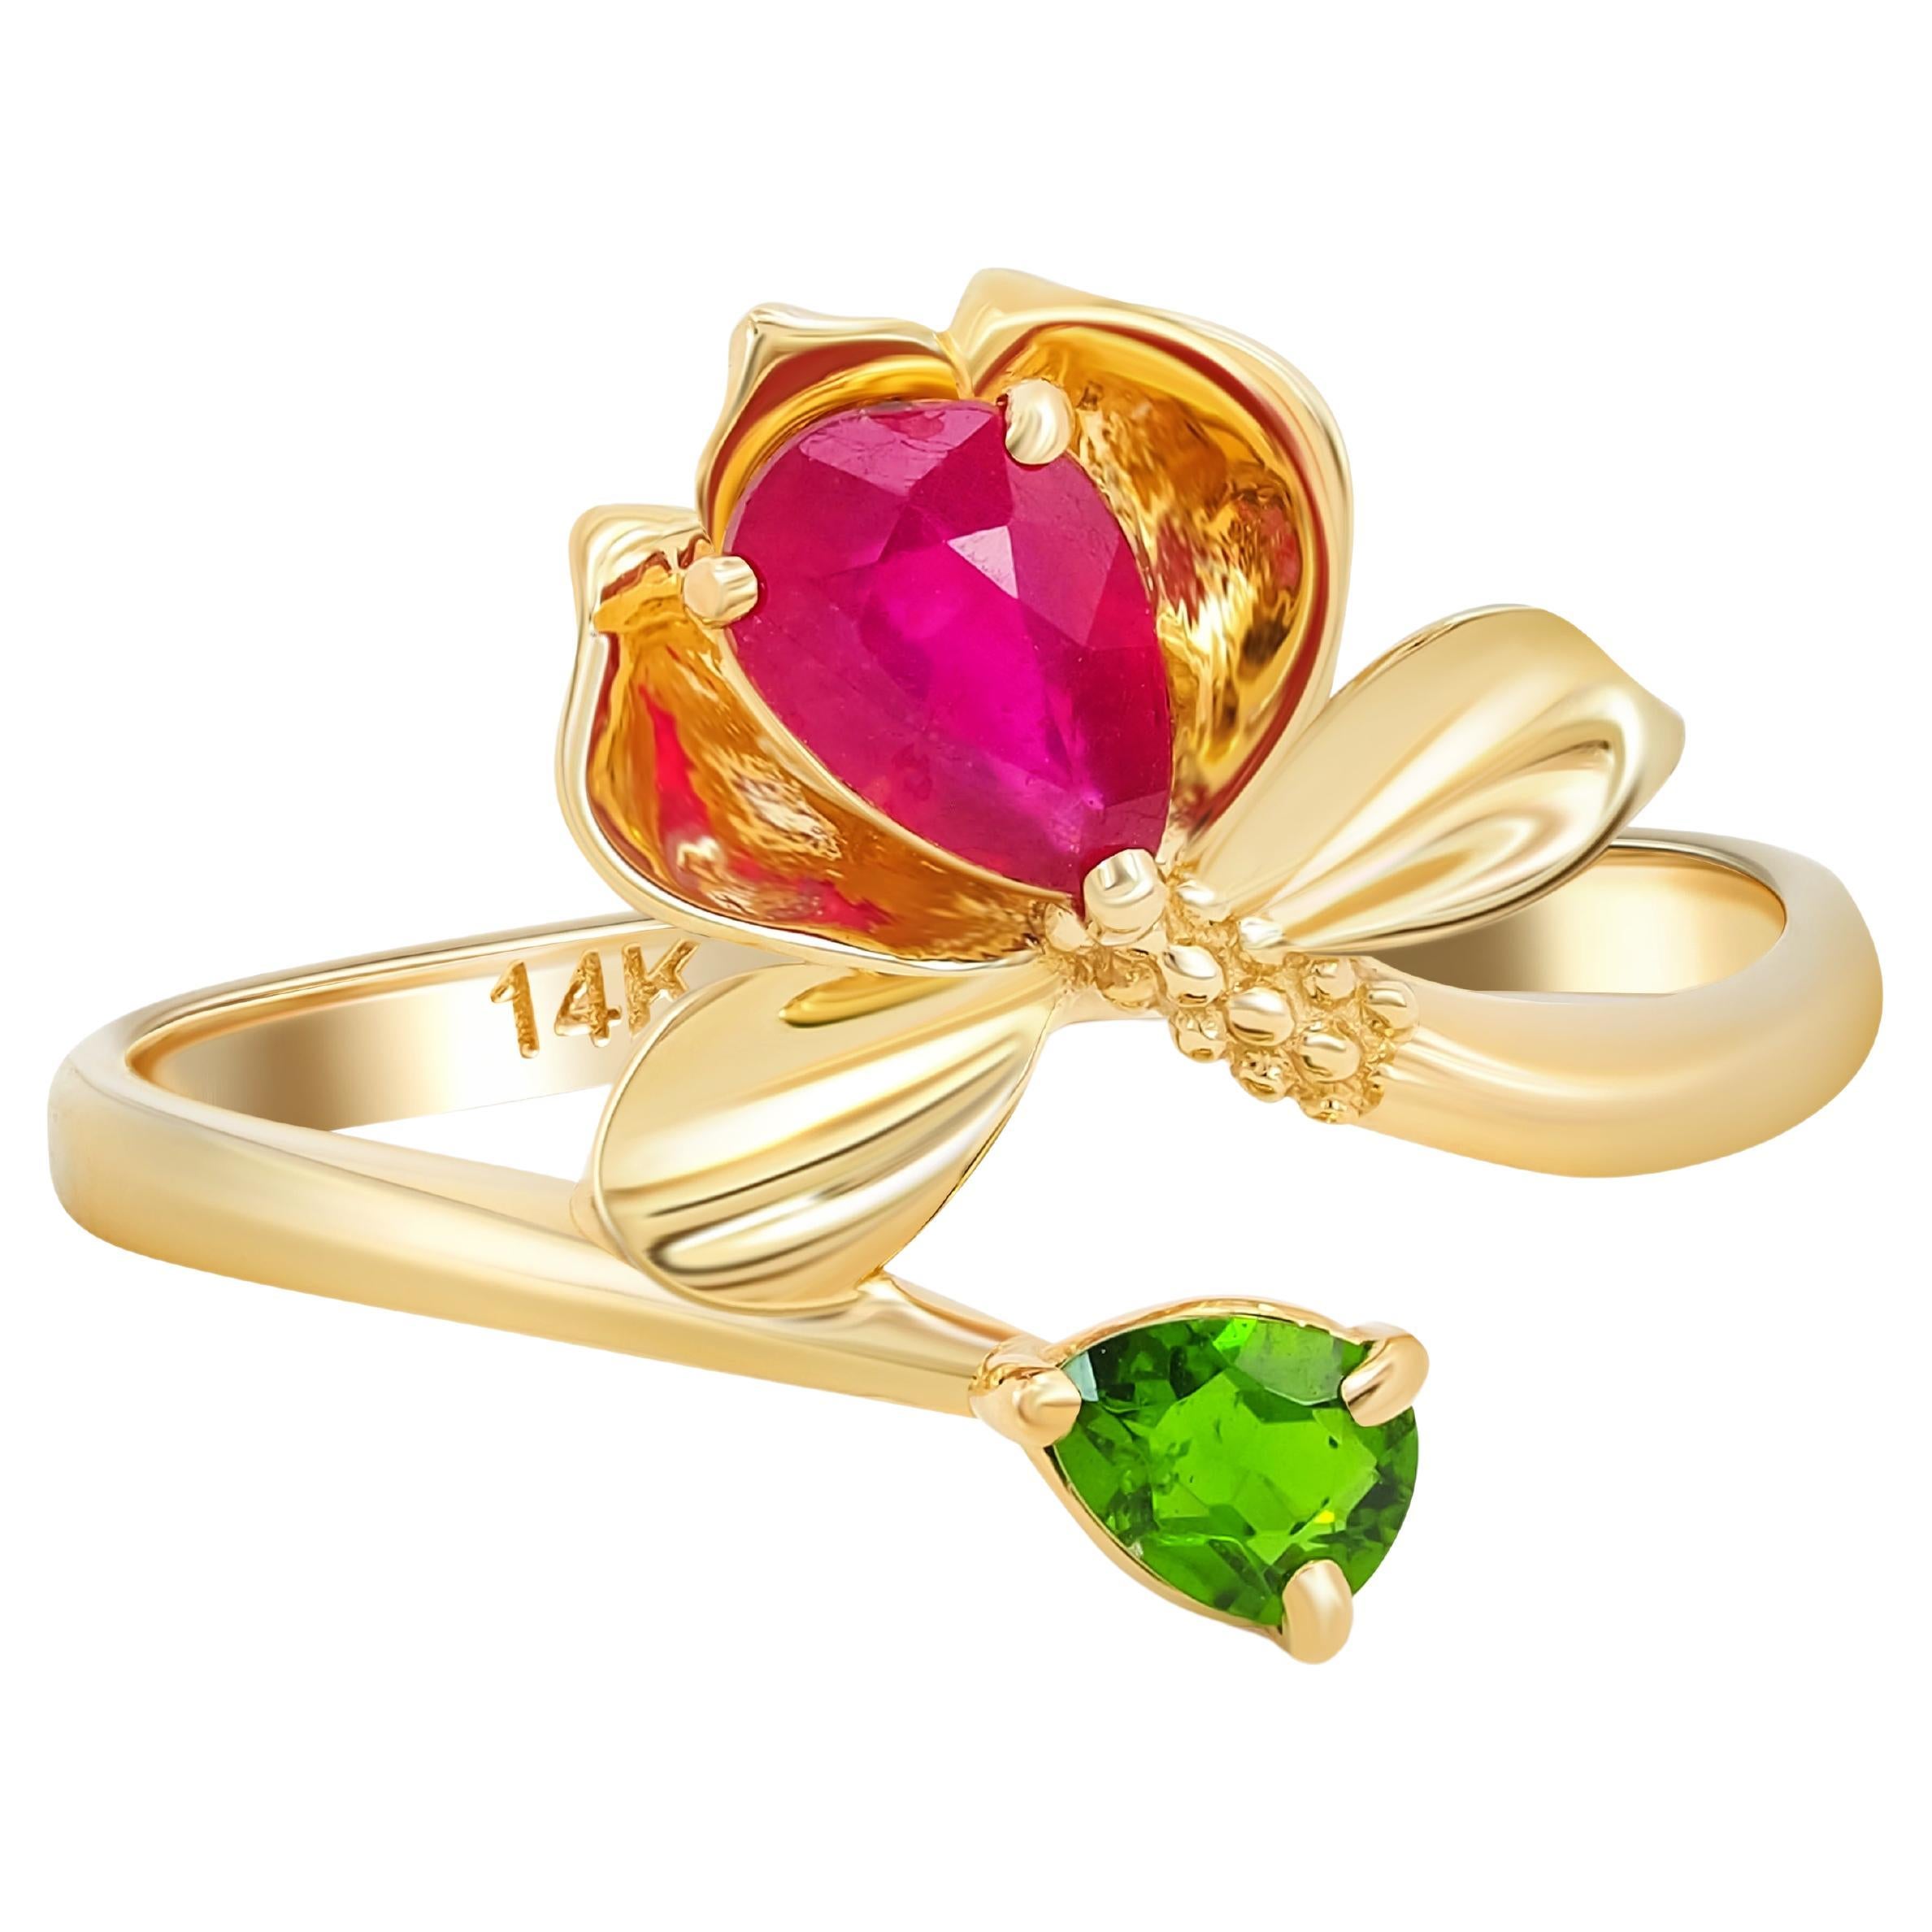 Water lily ruby ring.  For Sale